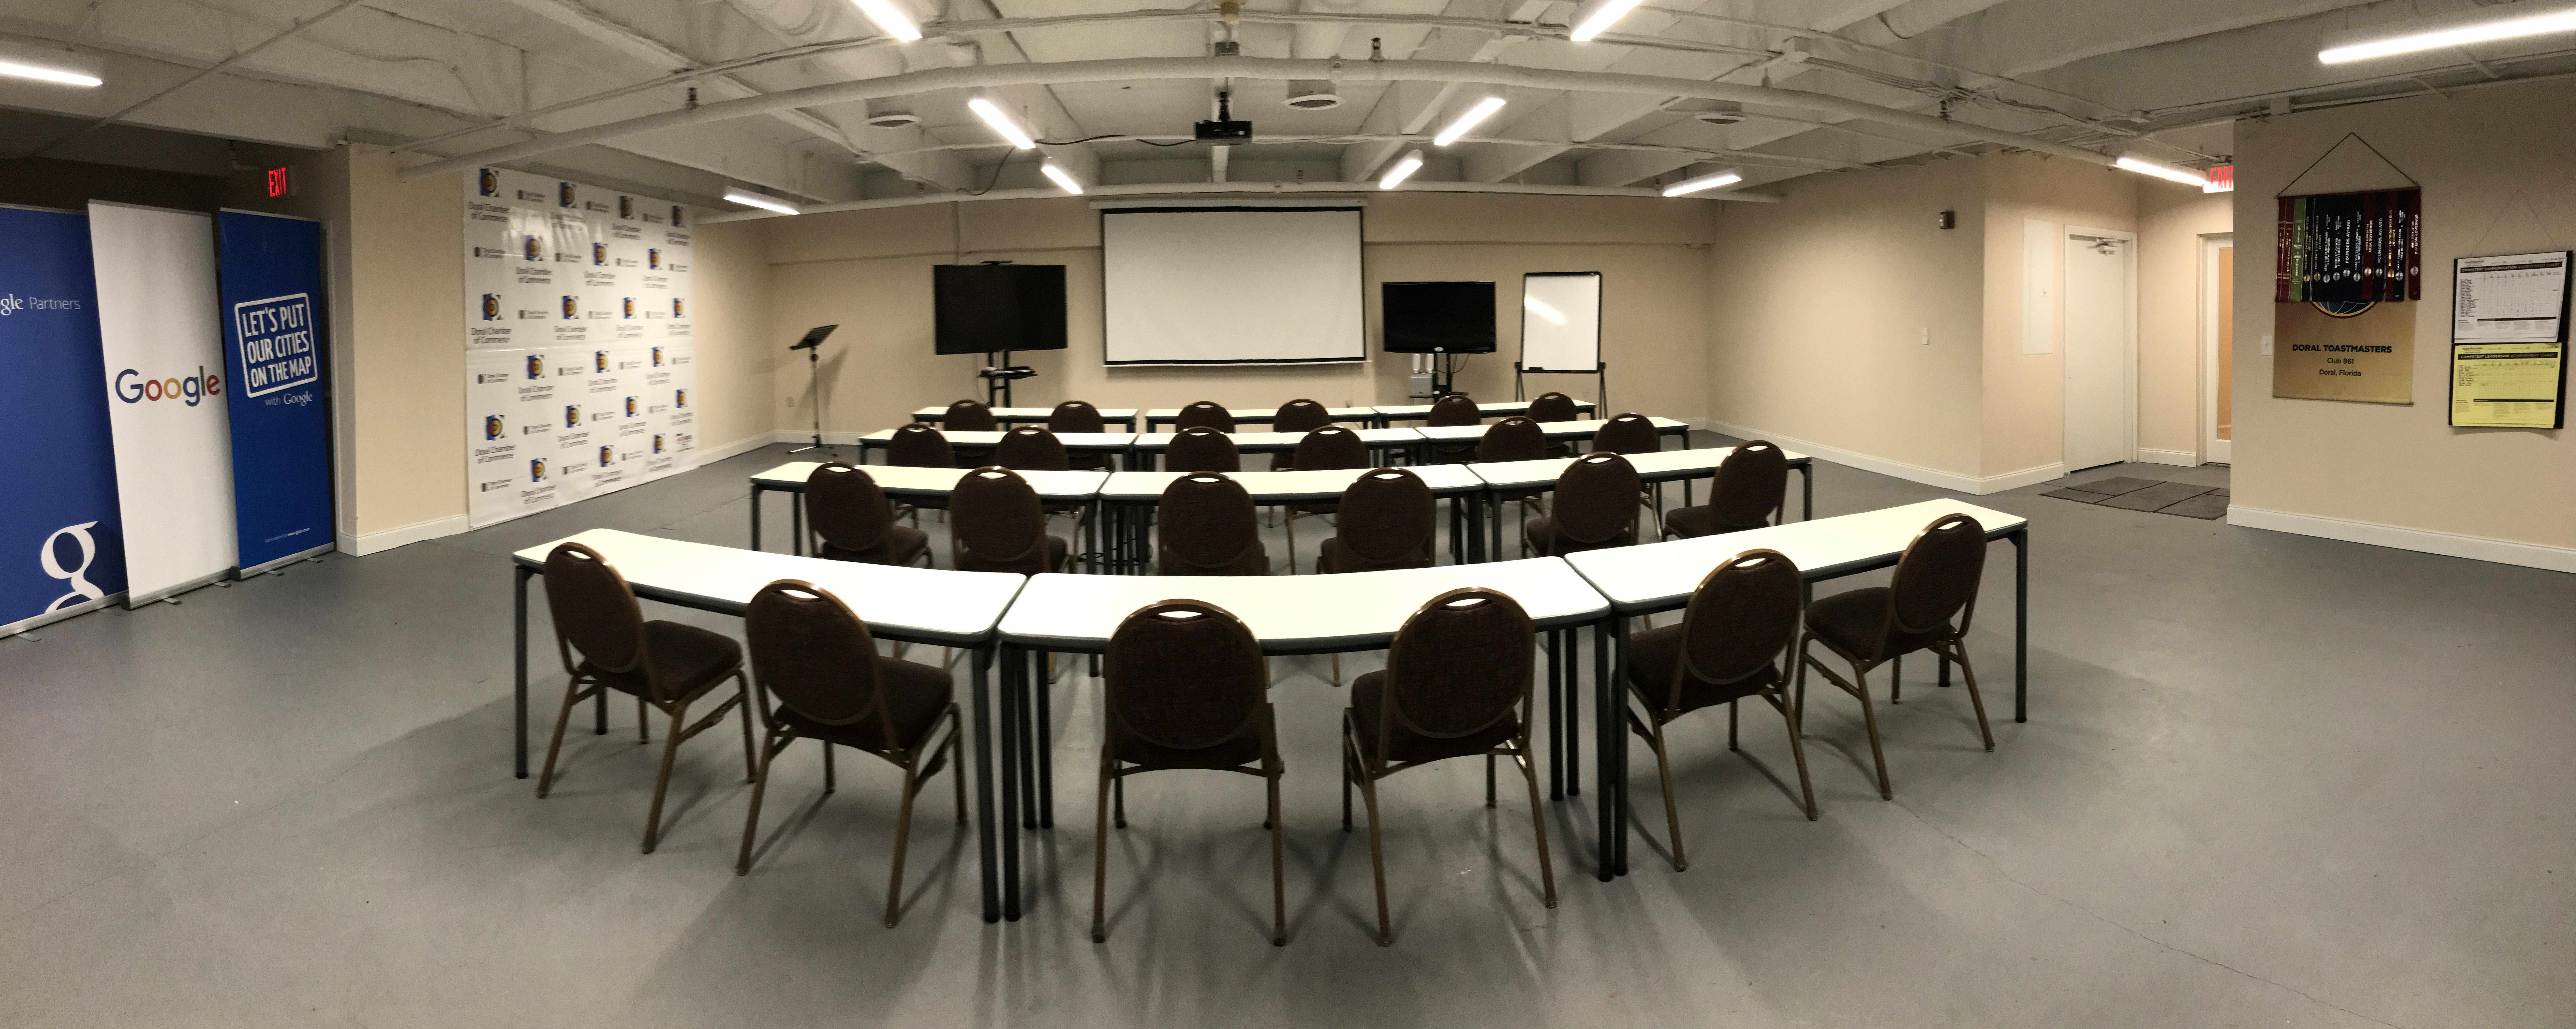 Doral Chamber of Commerce introduces it's own training room for rental.